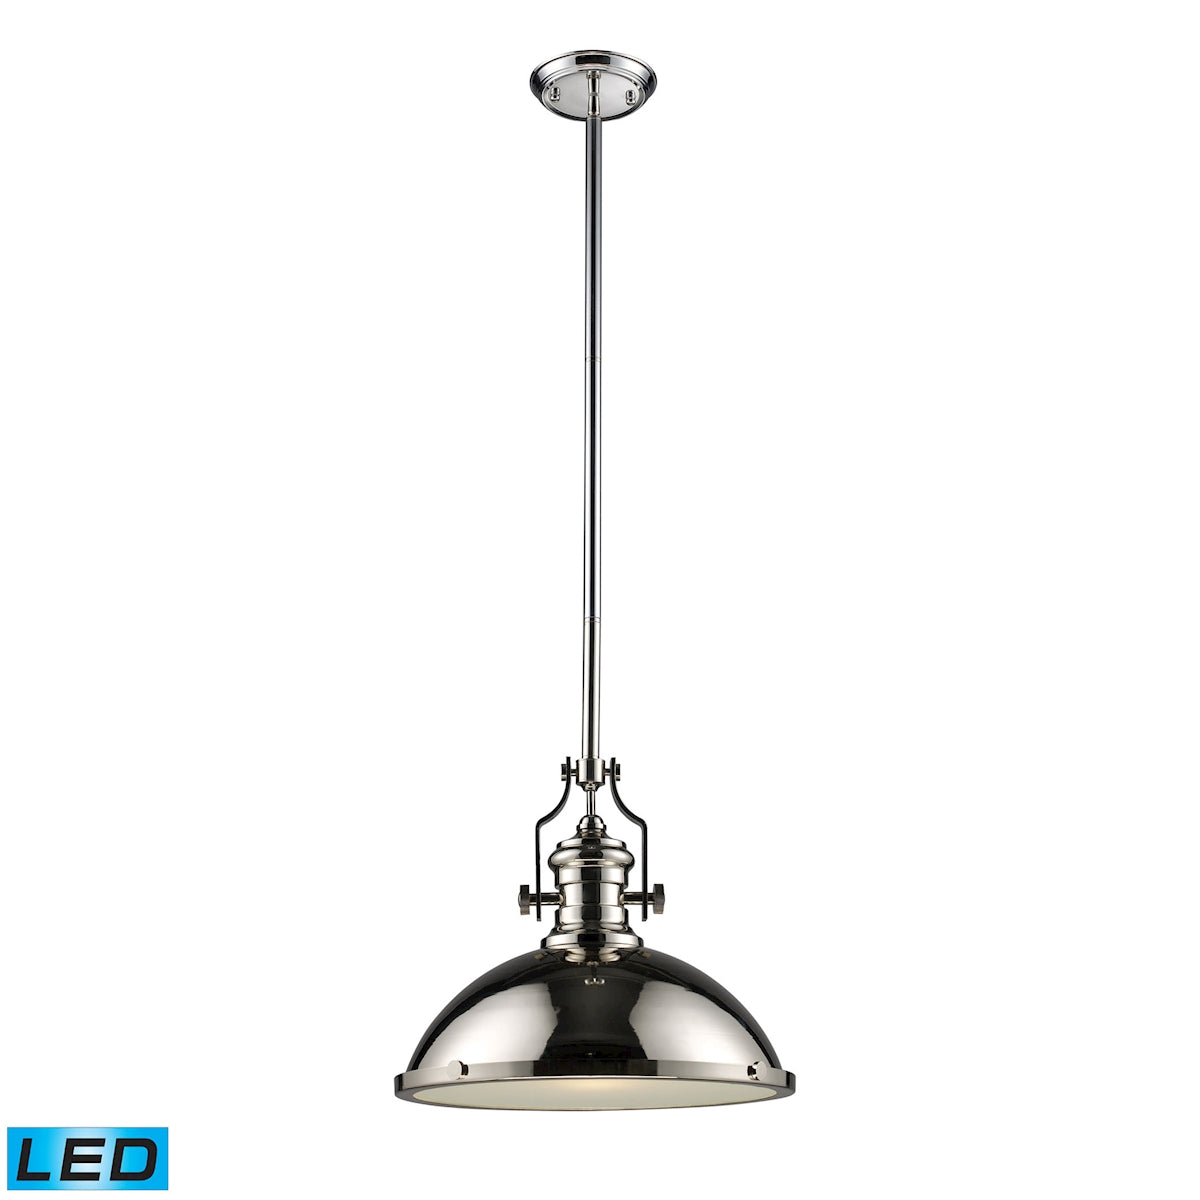 ELK Lighting 66118-1-LED Chadwick 1-Light Pendant in Polished Nickel with Matching Shades - Includes LED Bulb